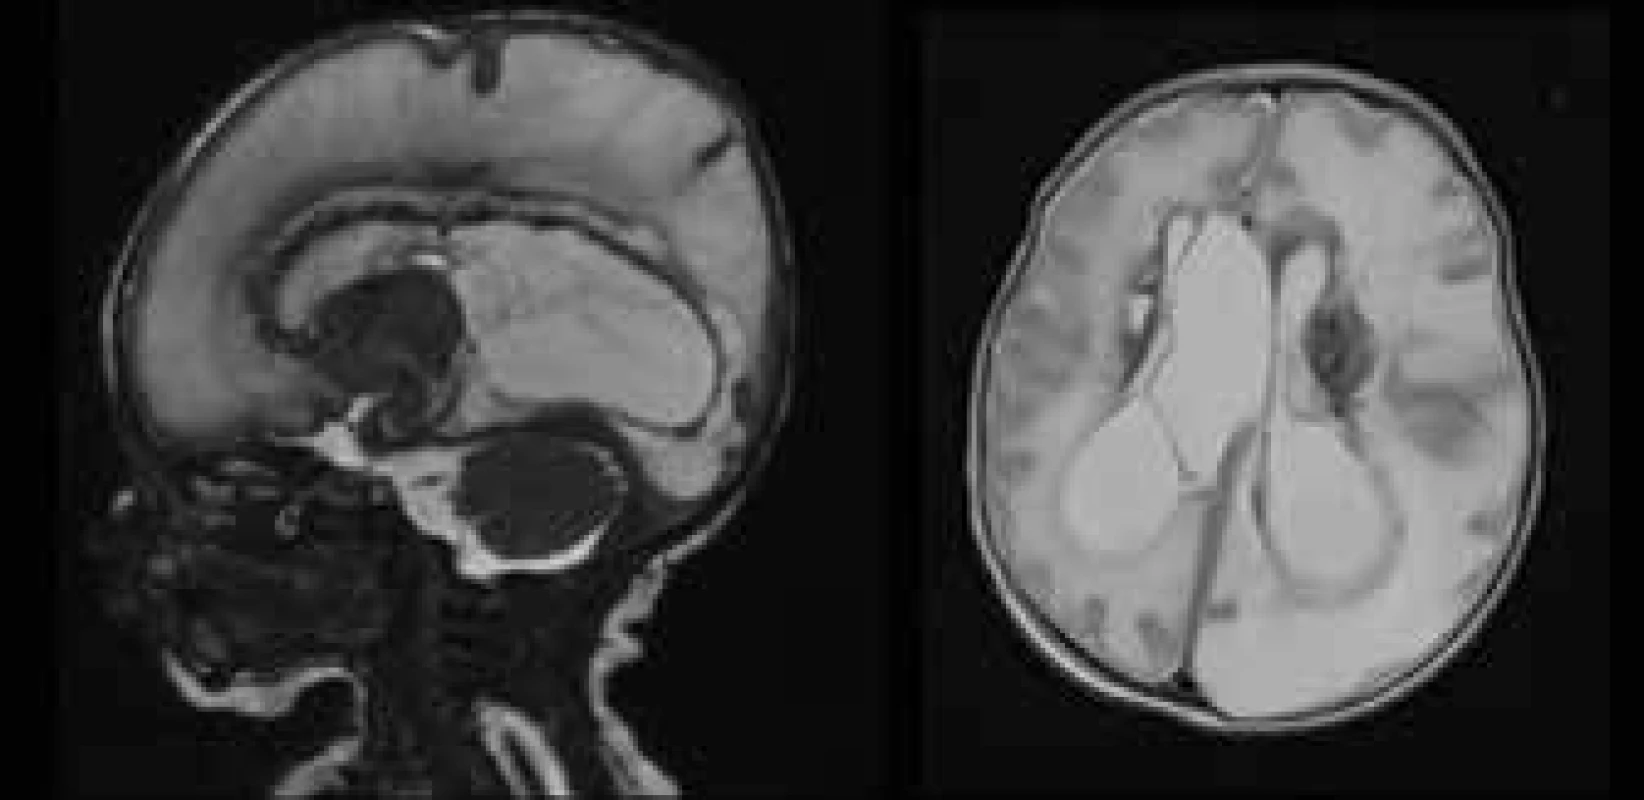 MRI examination of CNS – extensive ischemic-pseudocystic
changes of both brain hemispheres, husky parenchyma on left and
bilaterally evident periventricular haemorrhage.